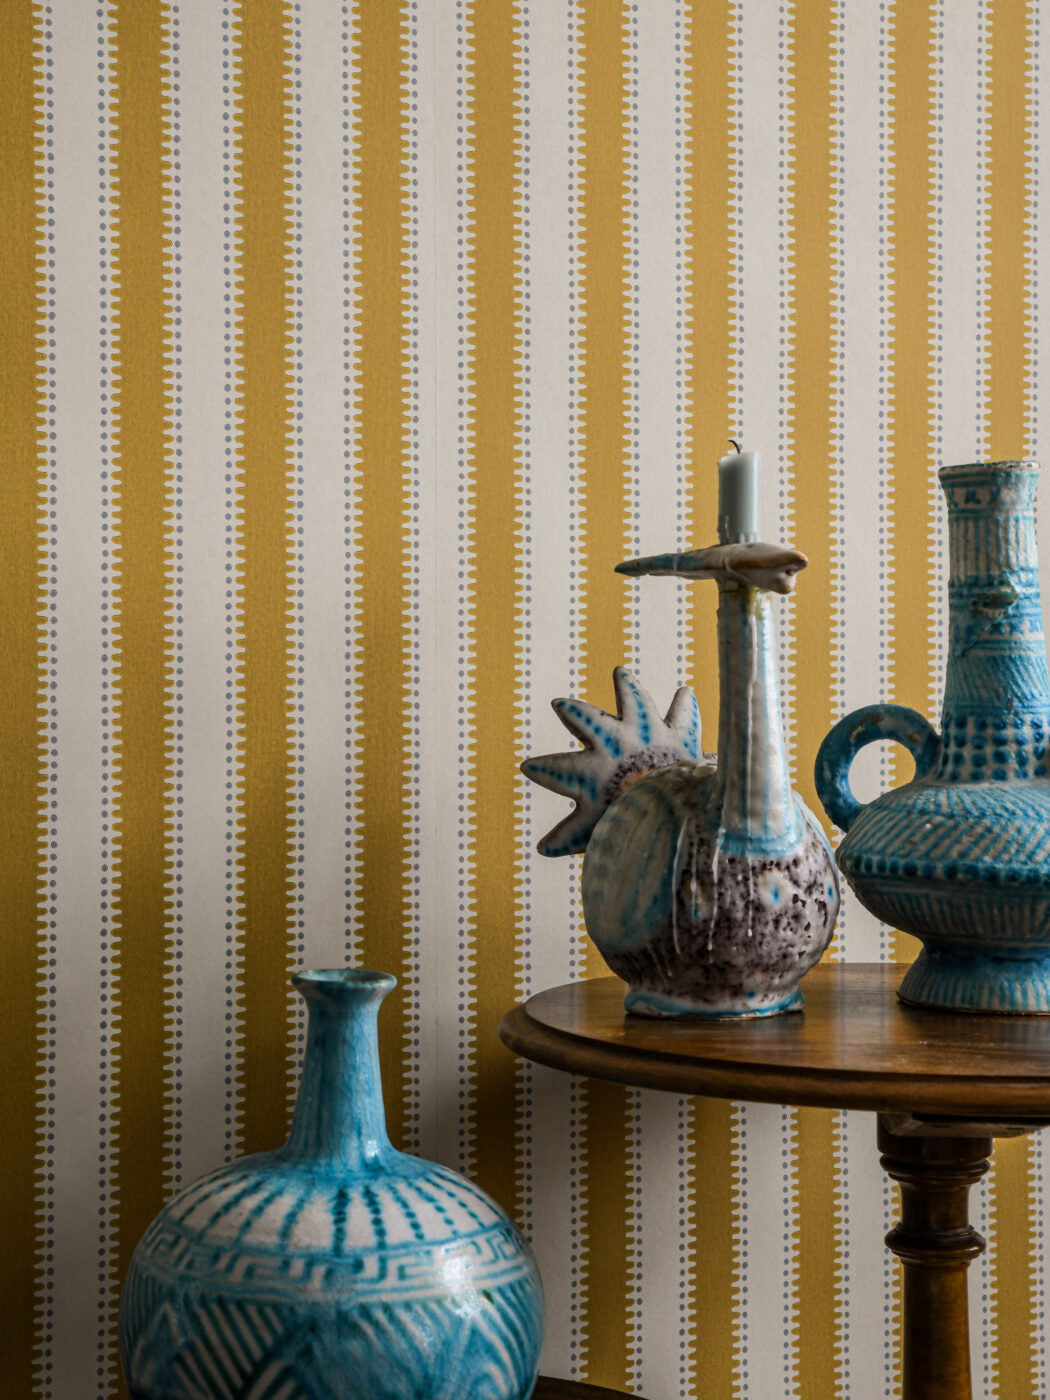  Make a stripe with jagged edges, add some dots and you’ll get a decorative, more playful striped wallpaper. 